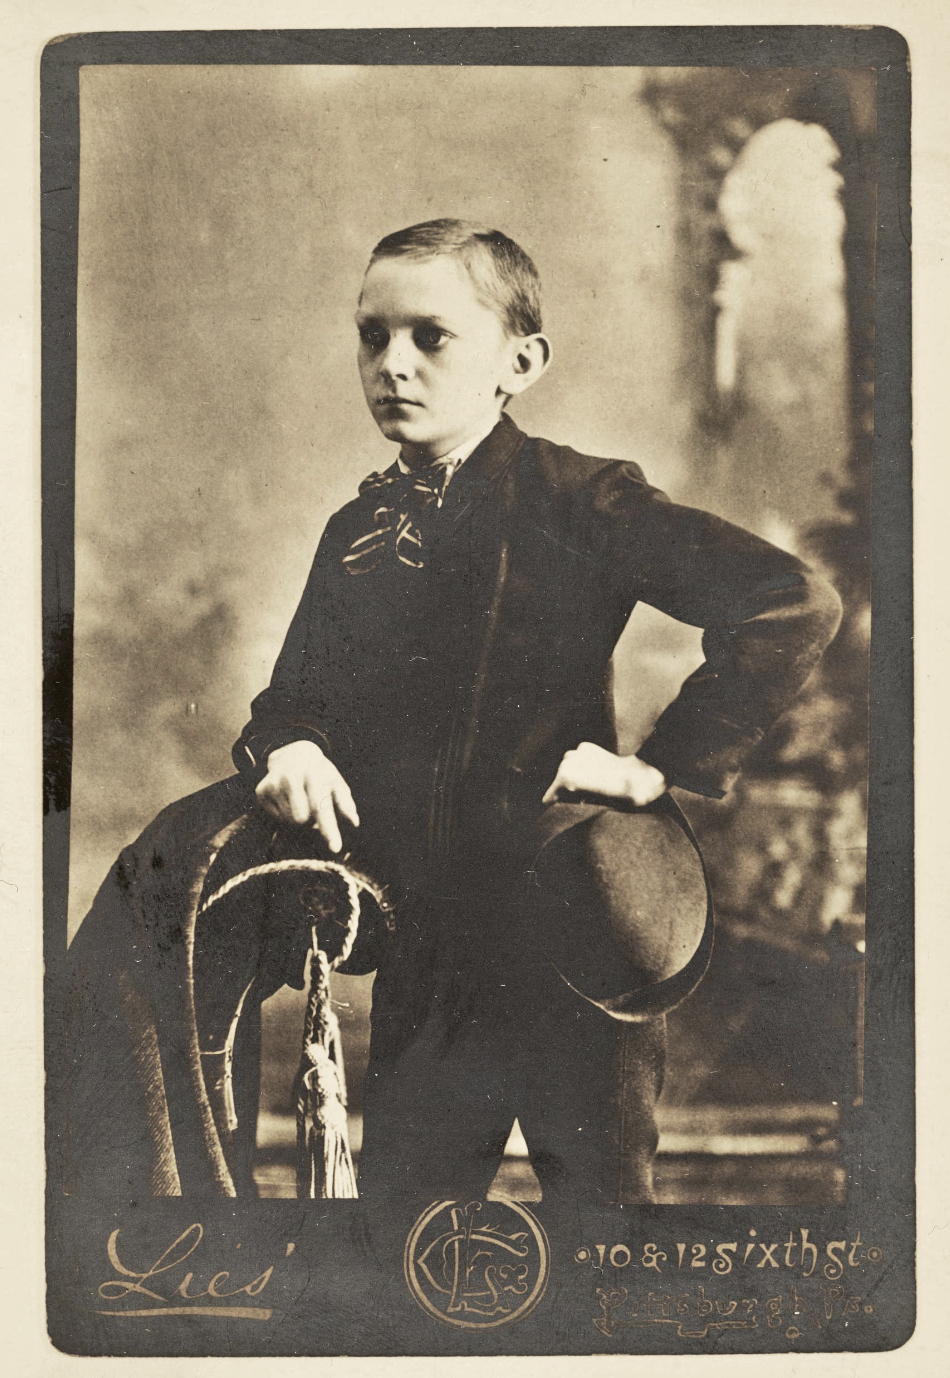 Charles Connick, age 10